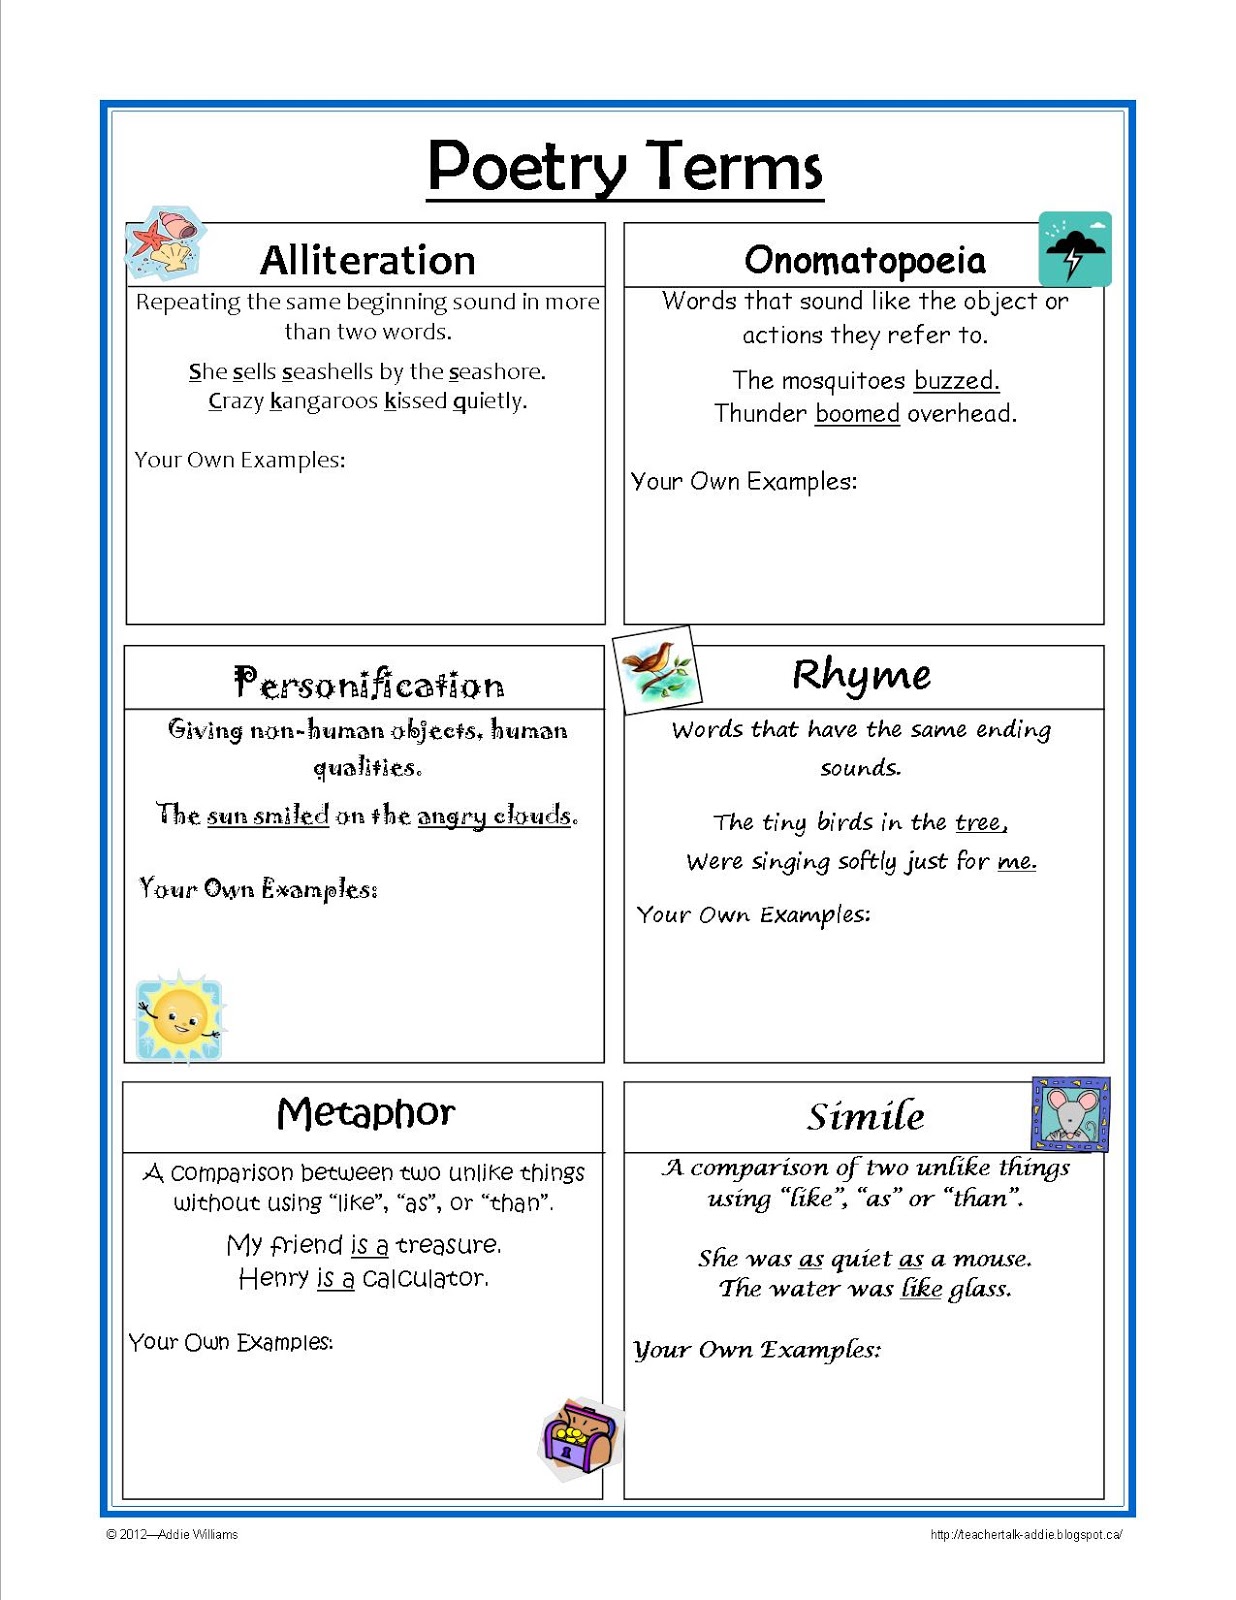 24-poems-about-reading-esl-worksheet-by-dk7711